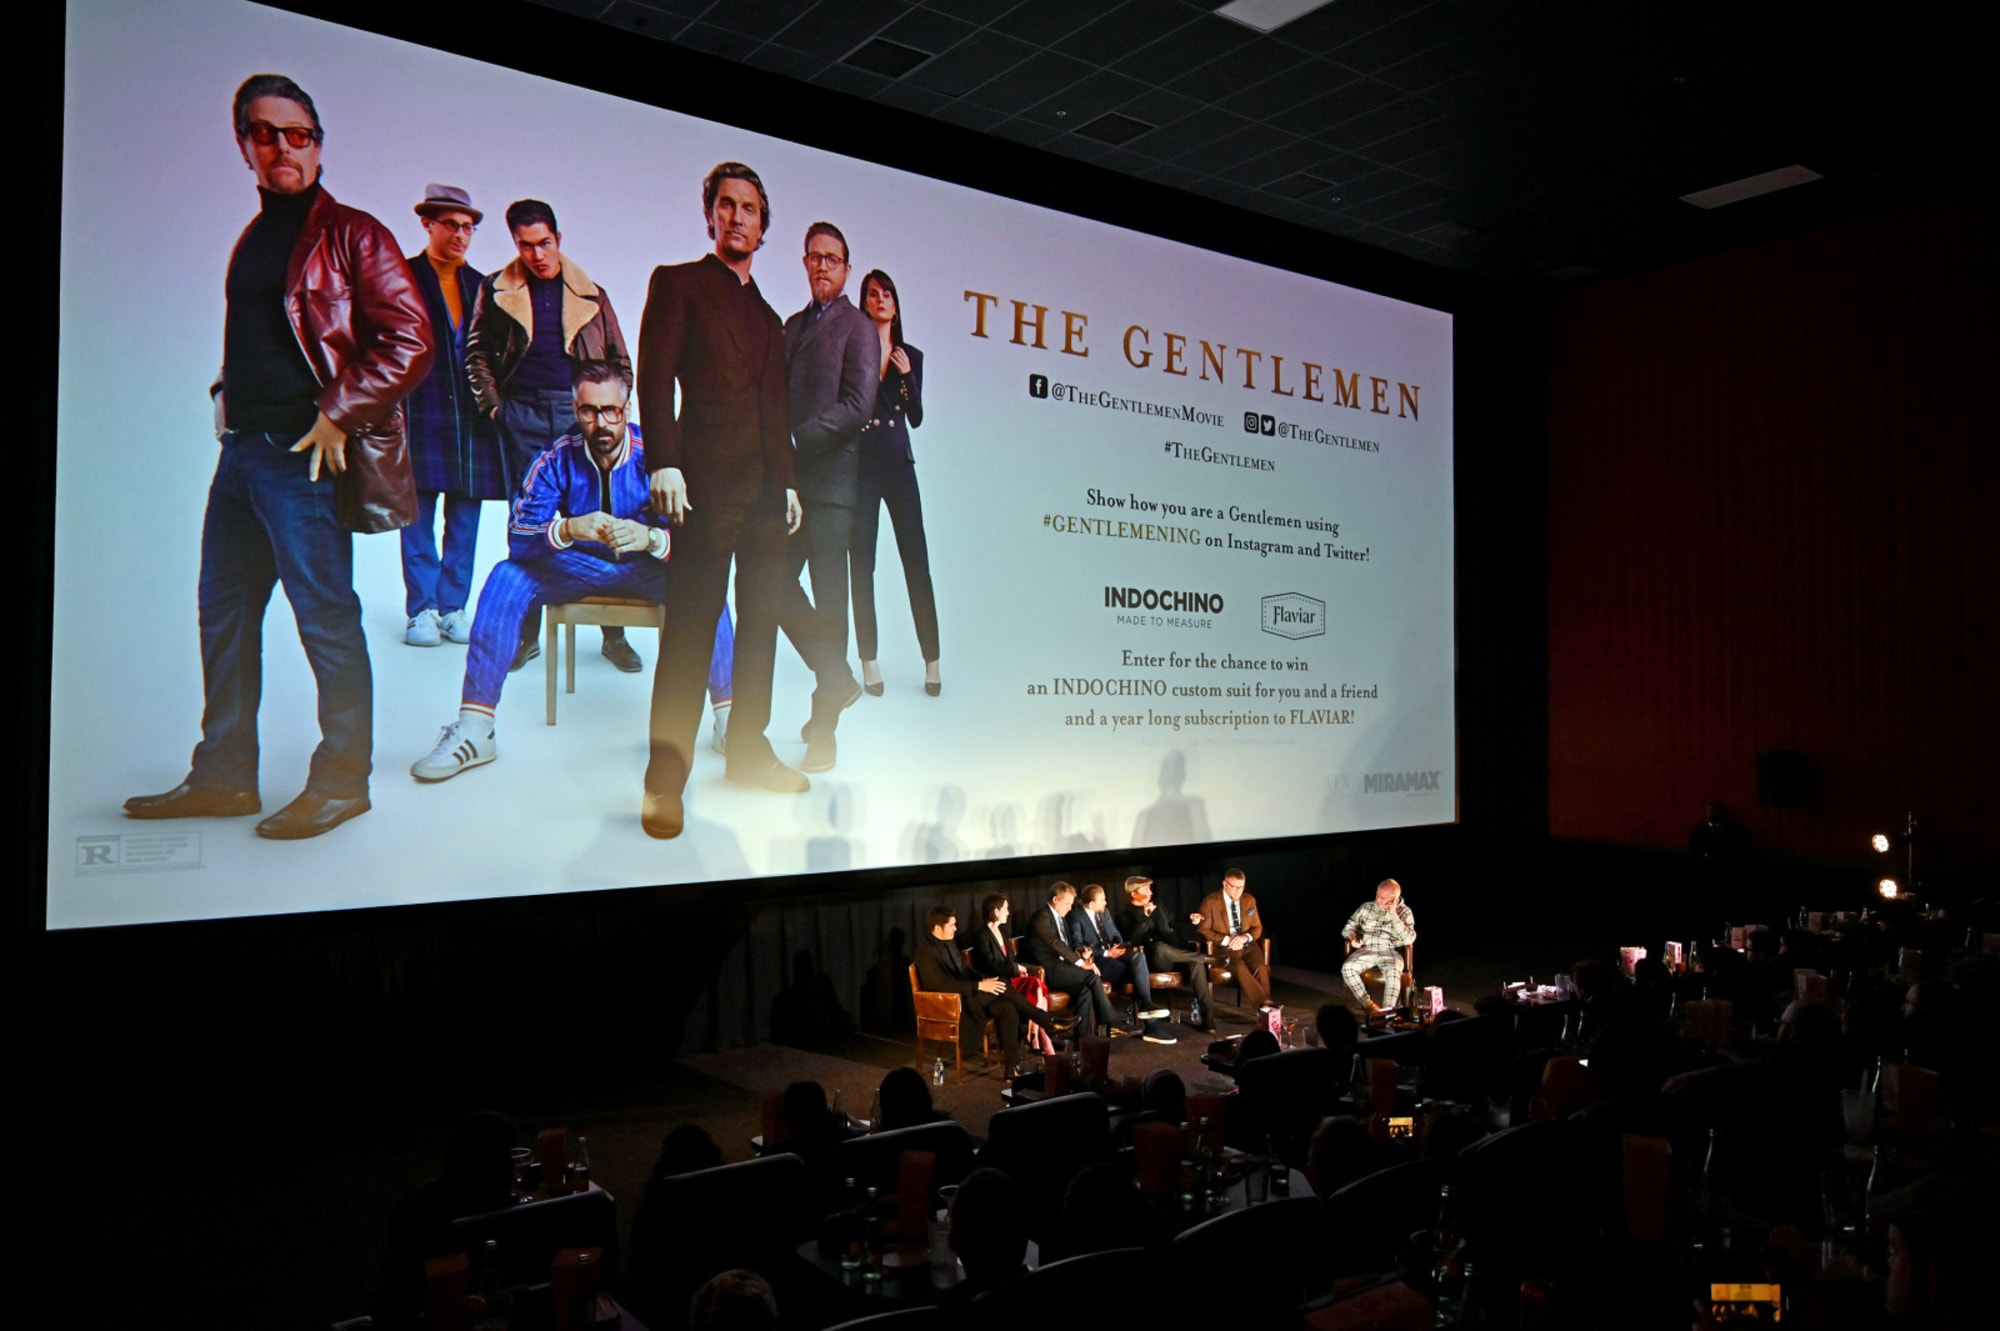 Where can you stream The Gentleman movie online? Netflix or Showtime